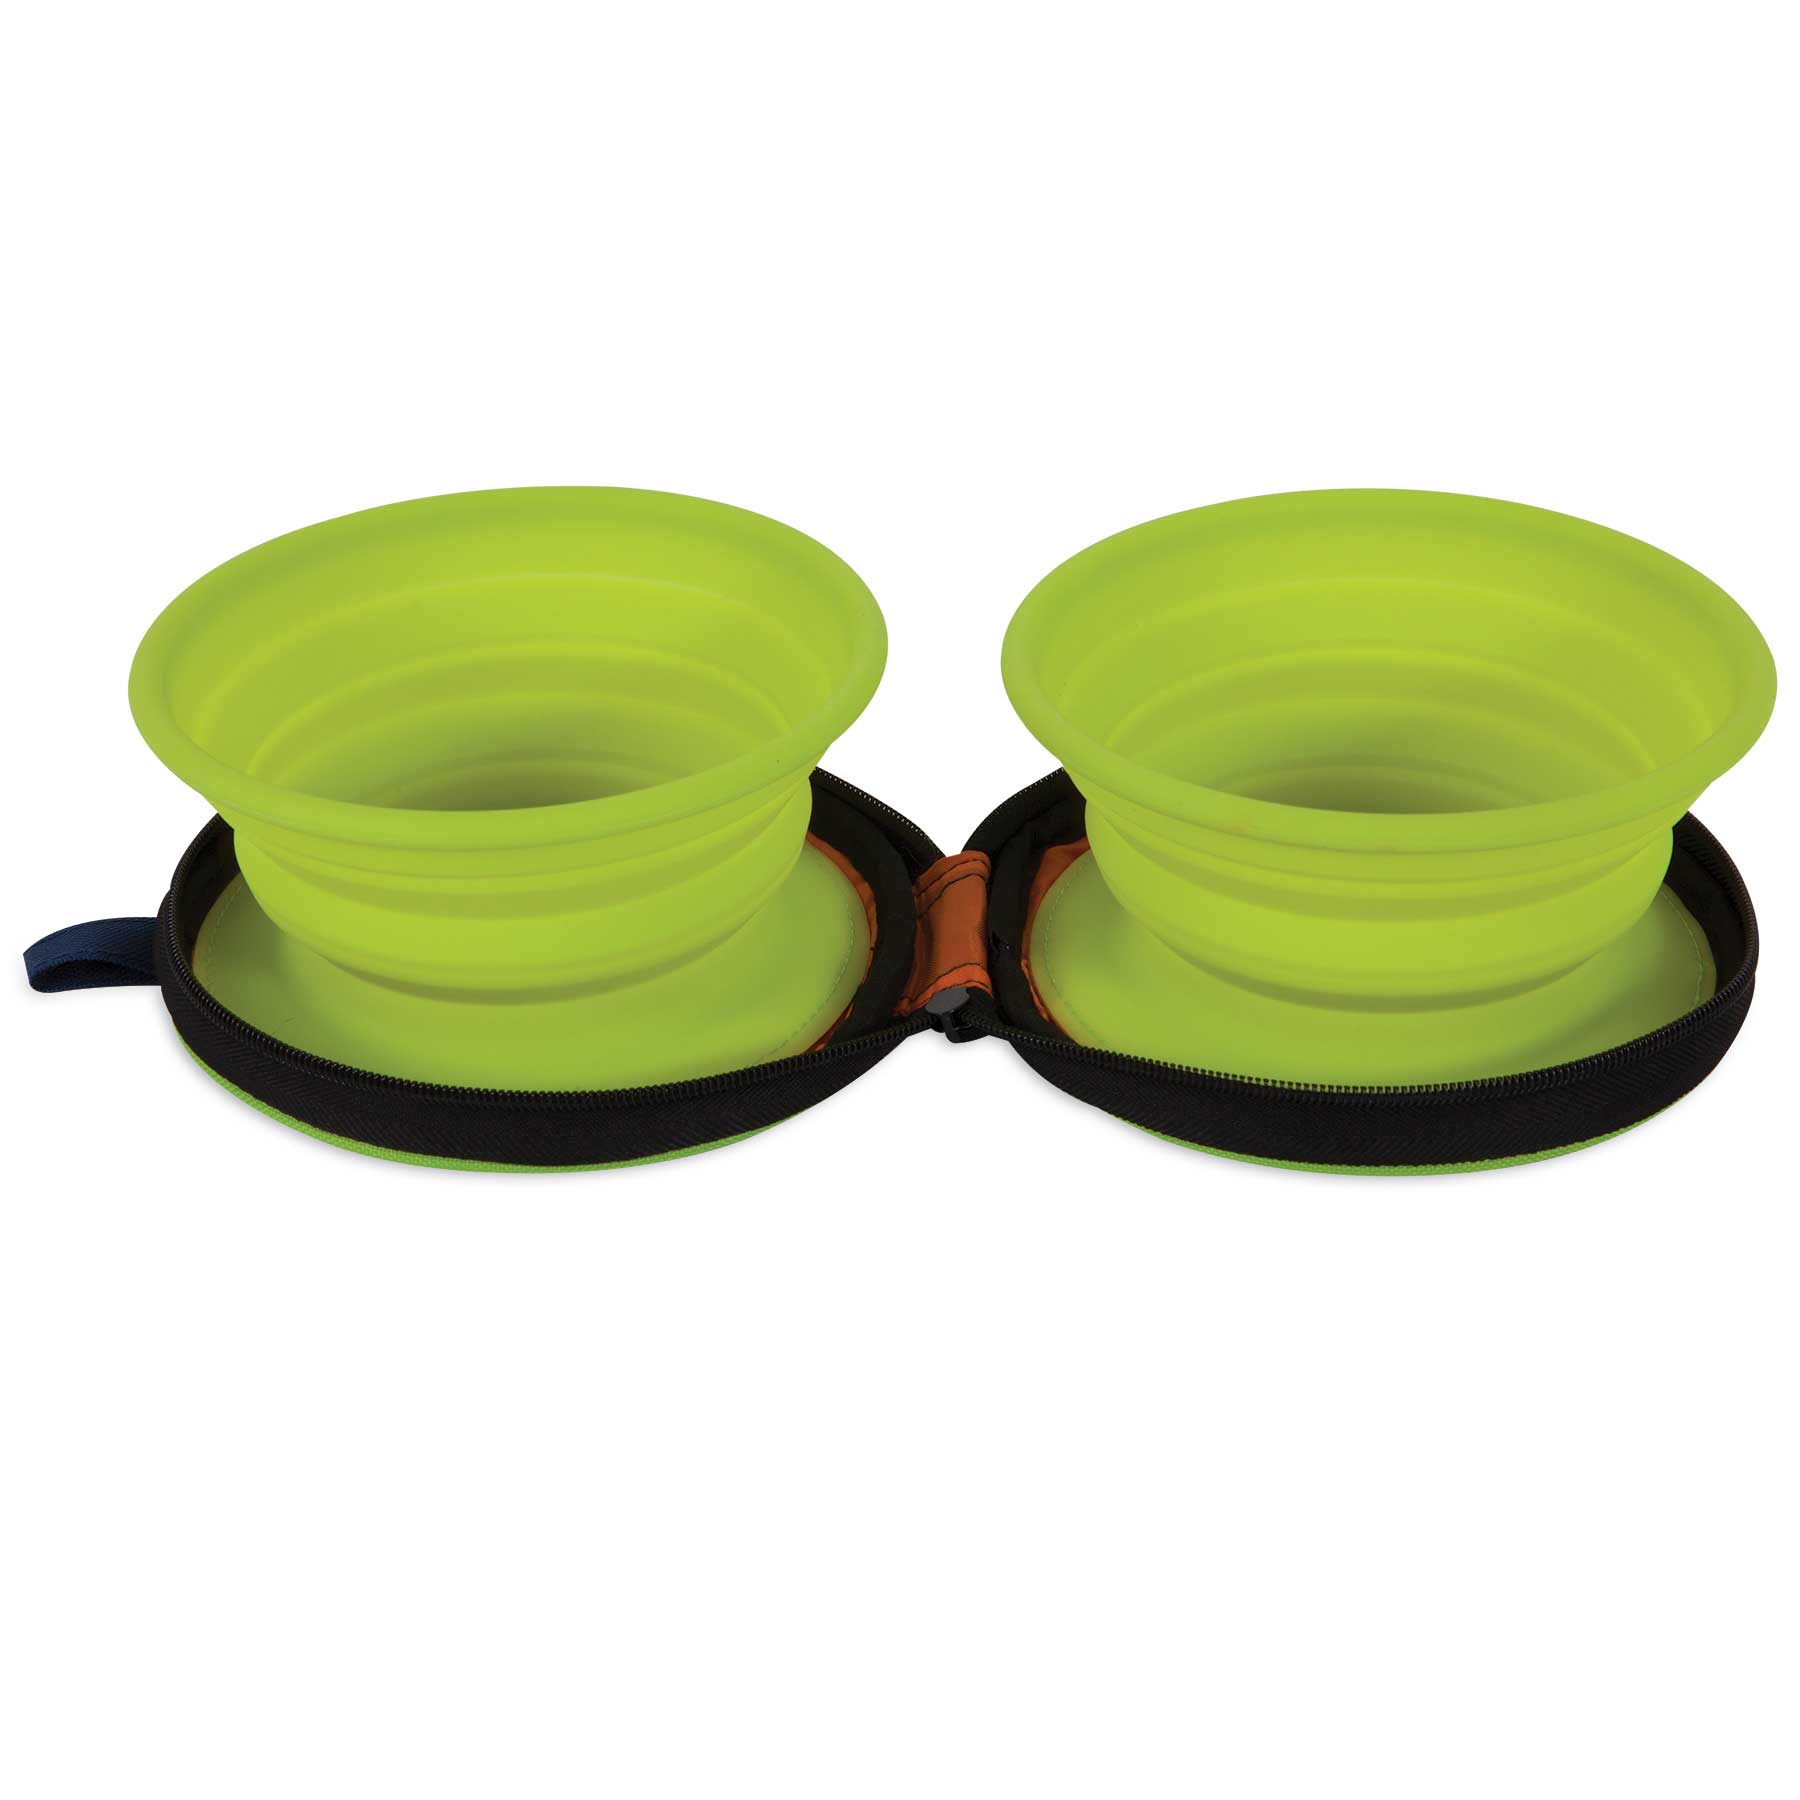 Petmate Silicone Travel Bowl Duo